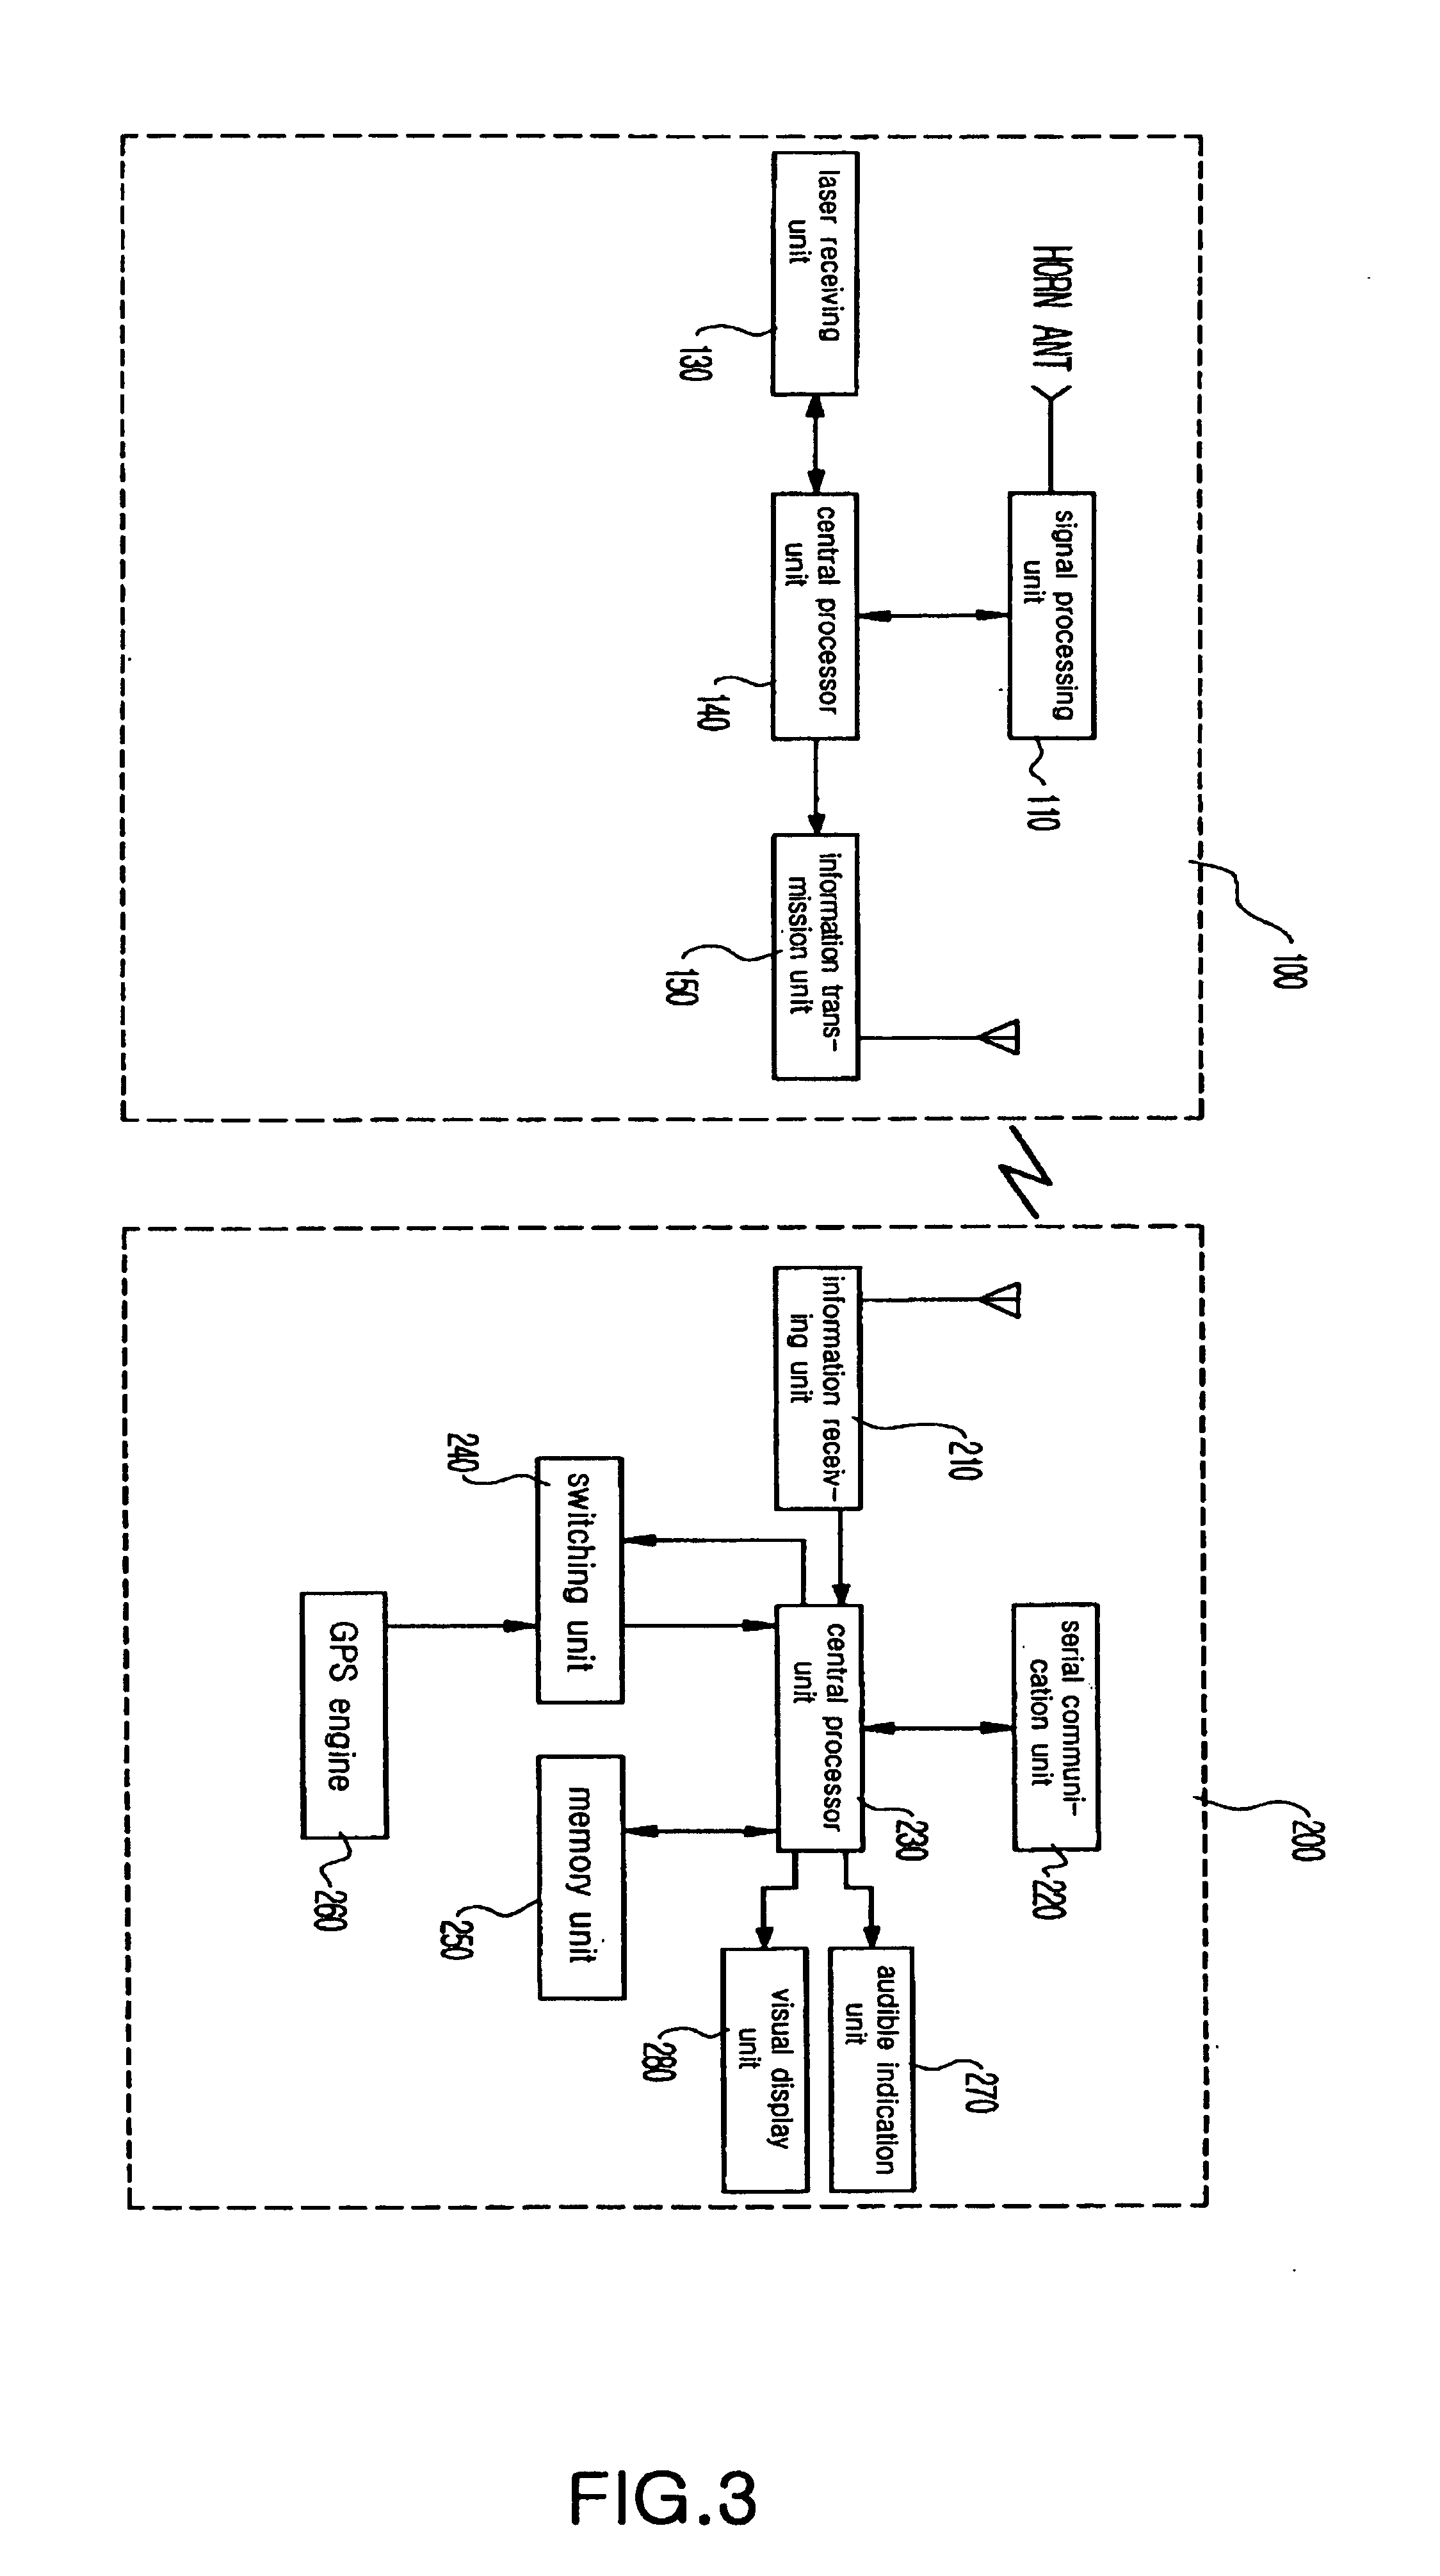 Combined radar and laser detector having GPS receiver and using wireless communication